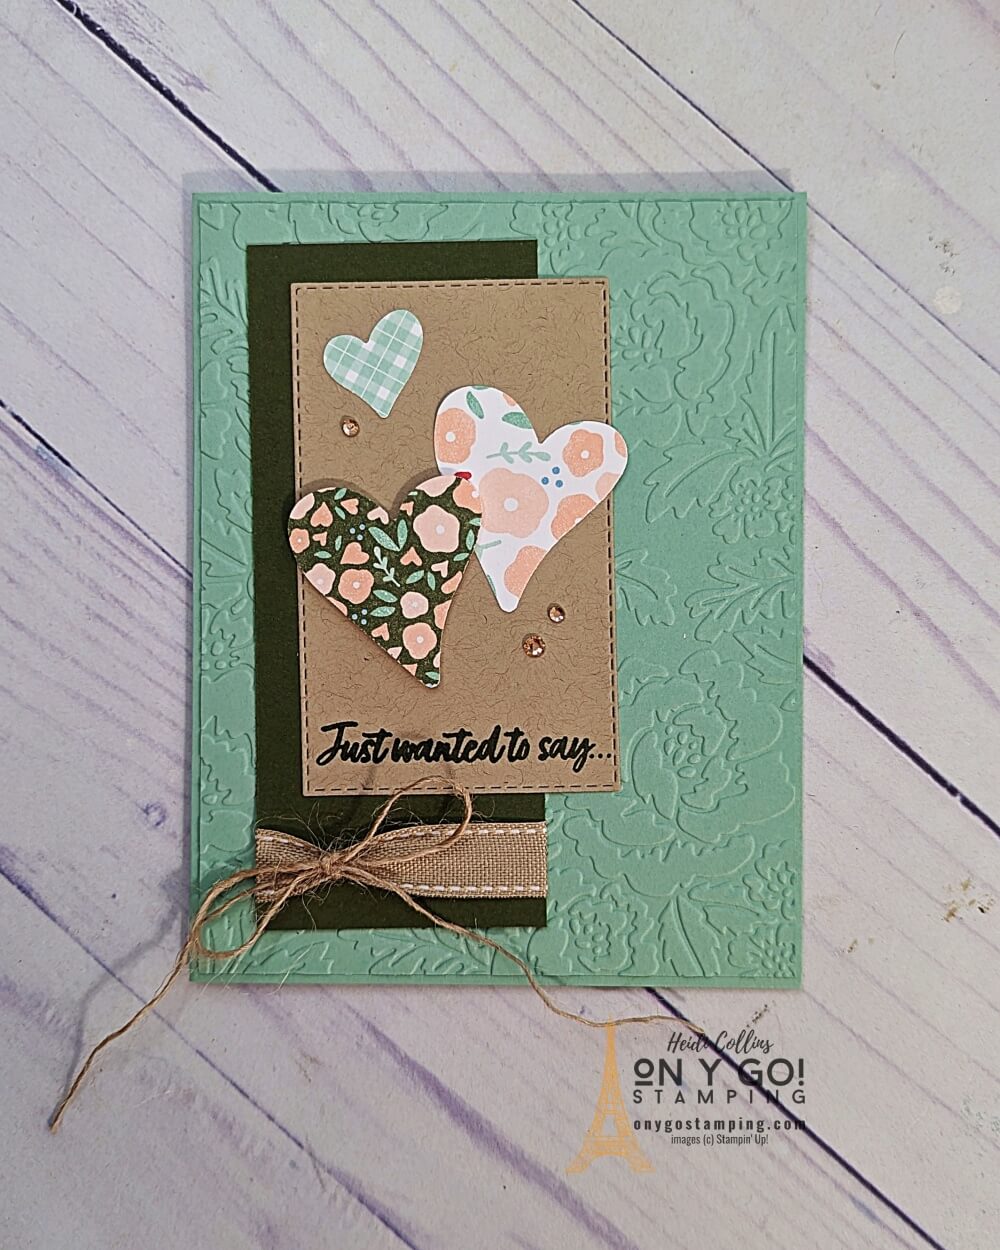 This Valentine's Day, create a heartfelt card for your special someone with the Country Bouquet stamp set from Stampin' Up! Add some special touches with patterned paper and punched hearts for a one-of-a-kind card that’s sure to make your loved one smile.